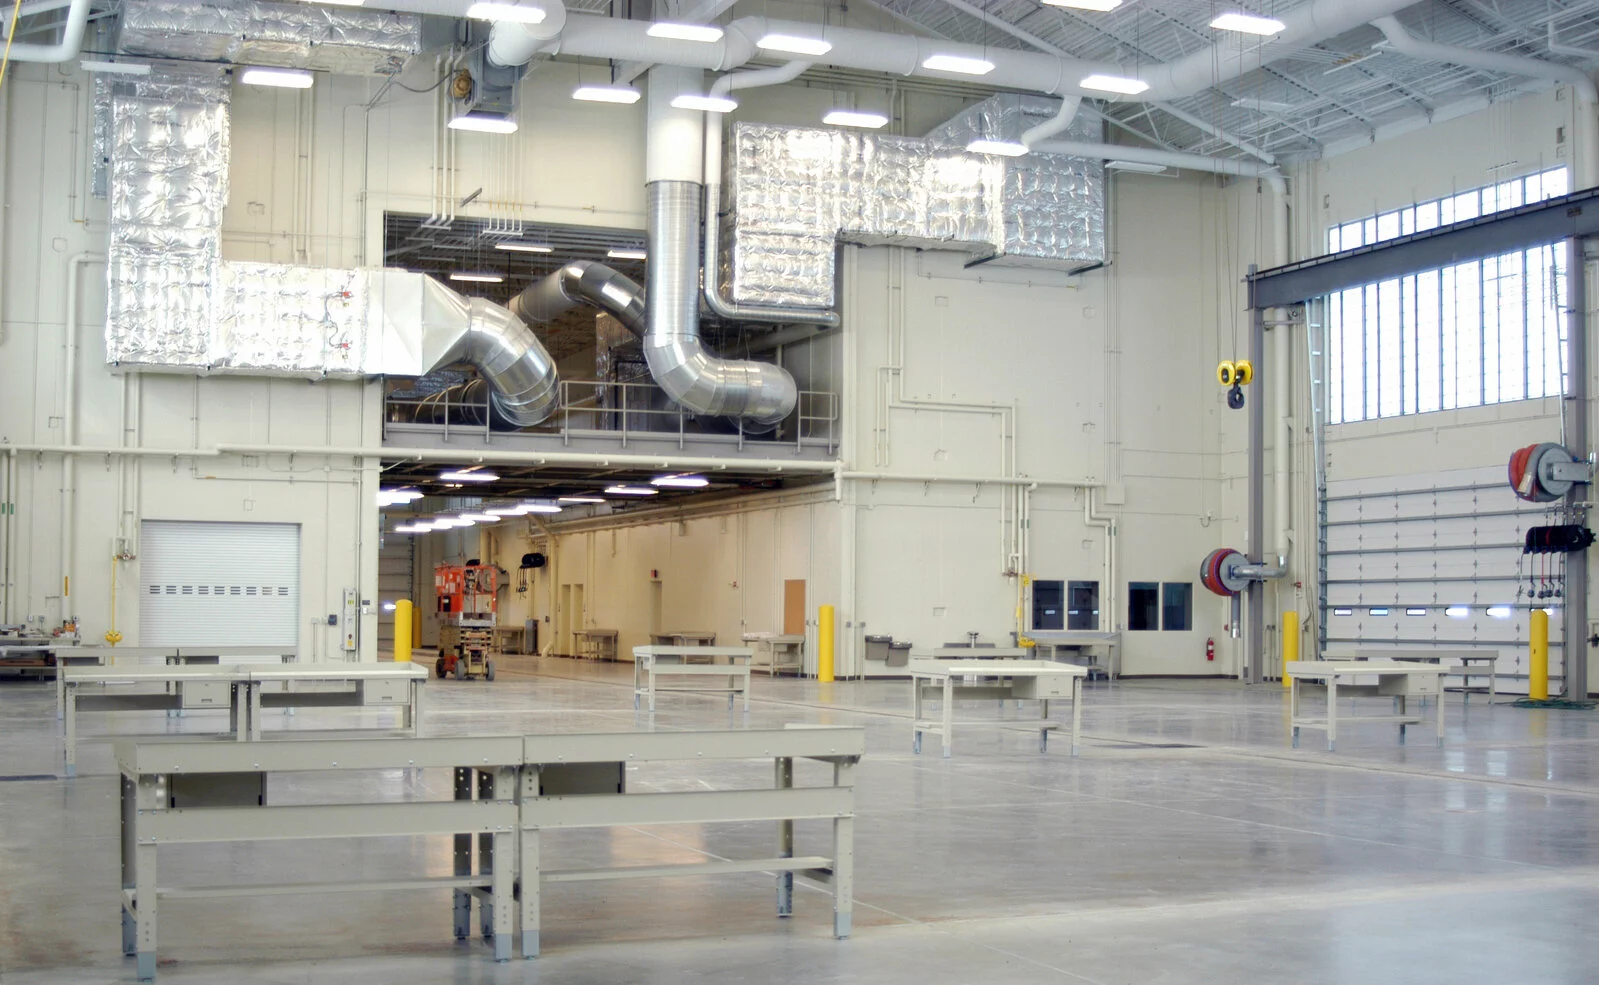 Interior US Army T.E.M.F facility, workbenches throughout facility, large ventilation chambers, large garage doors, concrete floor, high ceilings.